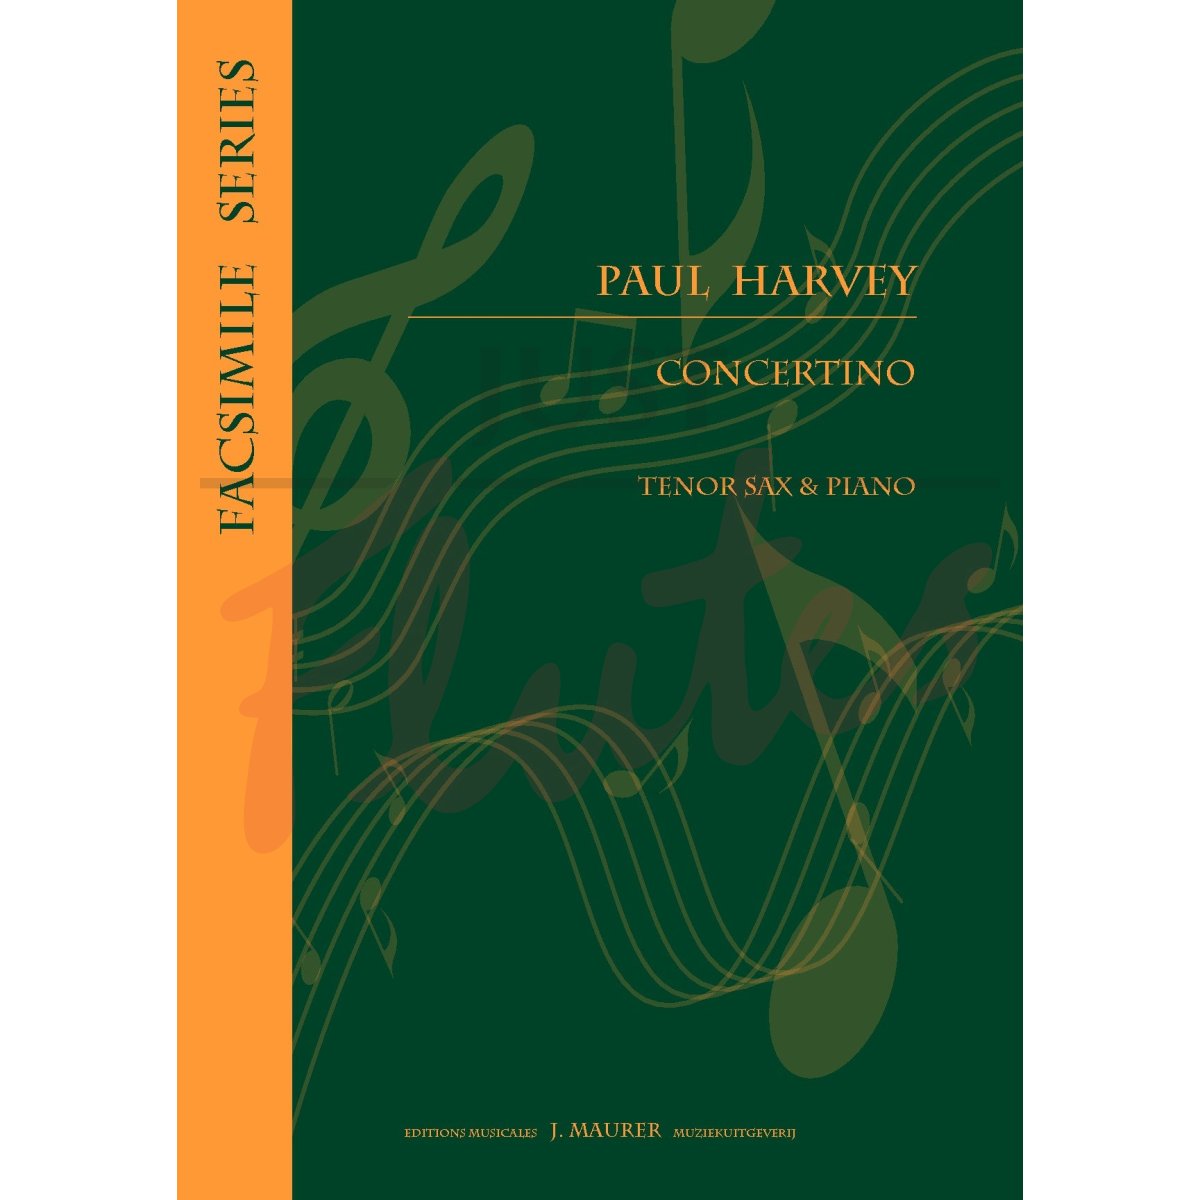 Concertino for Tenor Saxophone and Piano